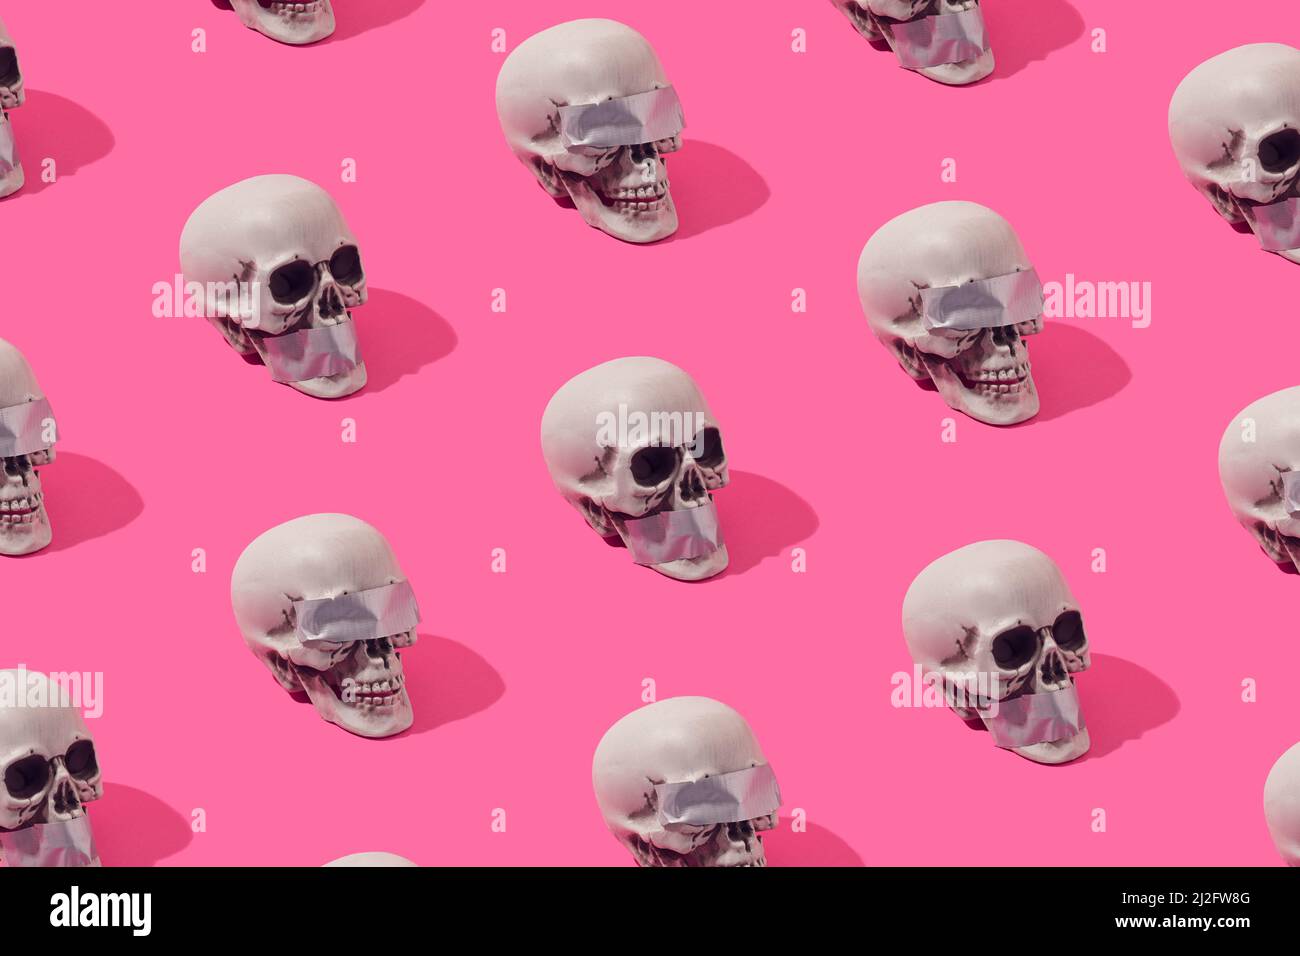 Human skulls with with duct tape over the eyes and mouth on a pink background. Truth and justice illusion pattern. Stock Photo